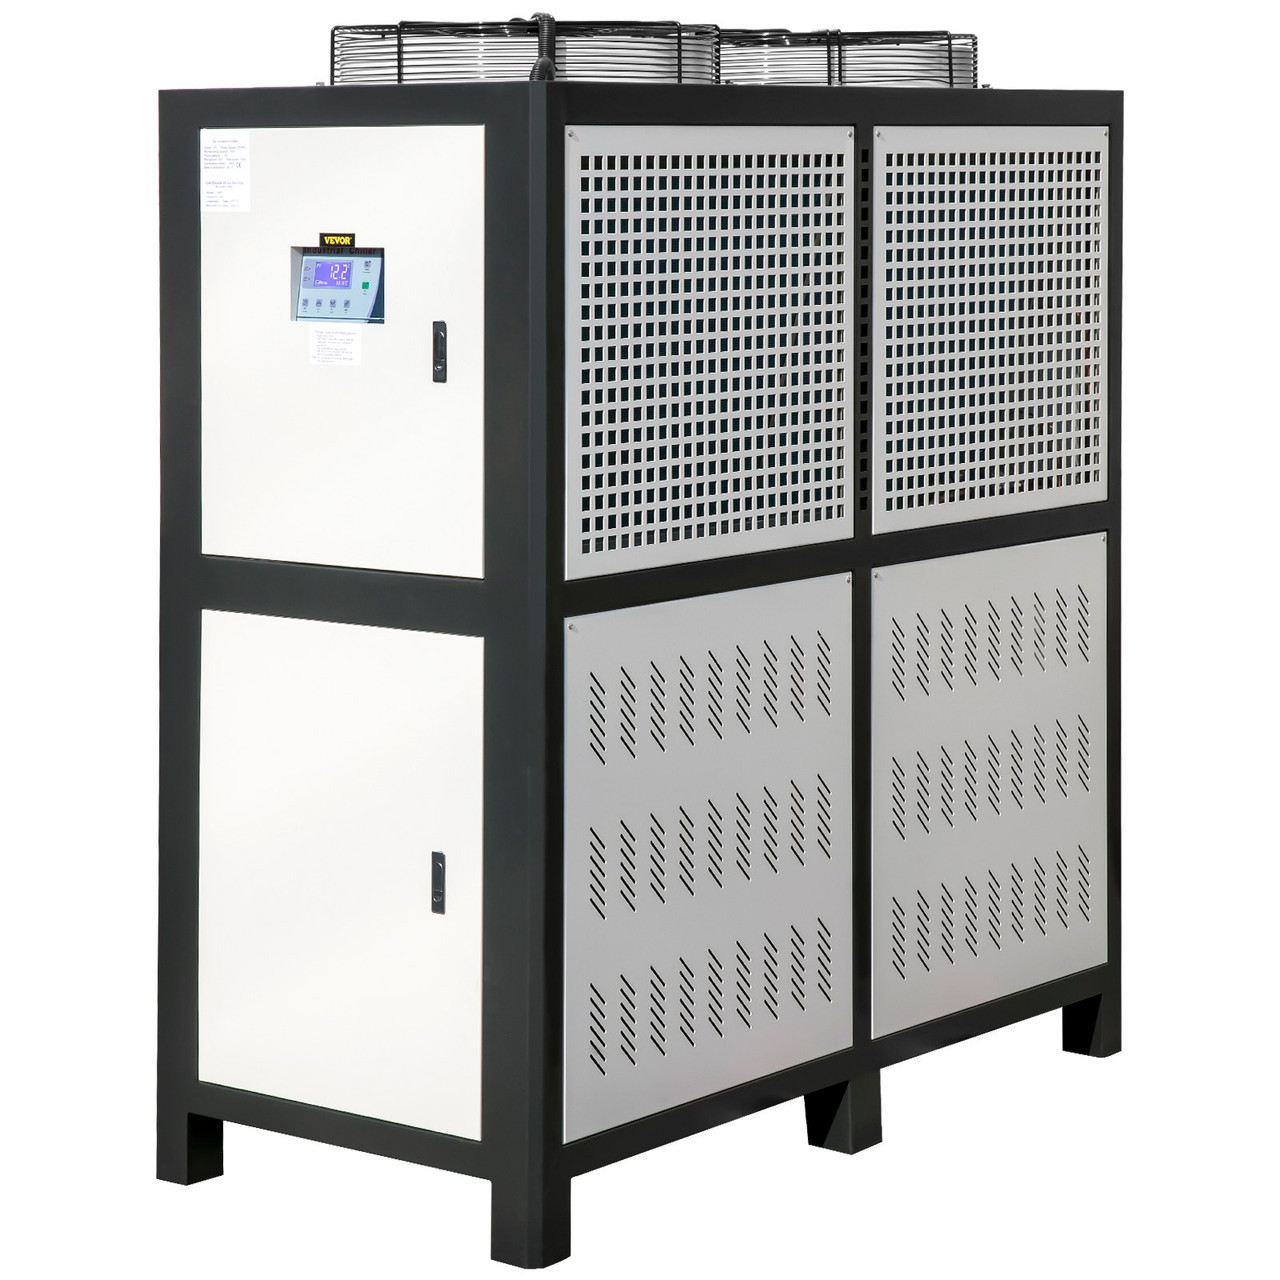 Water Chiller 15Ton, Capacity Industrial Chiller 15Hp, Air-Cooled Water Chiller, Finned Condenser, w/ Micro-Computer Control, Stainless Steel Water Tank Chiller Machine for Cooling Water